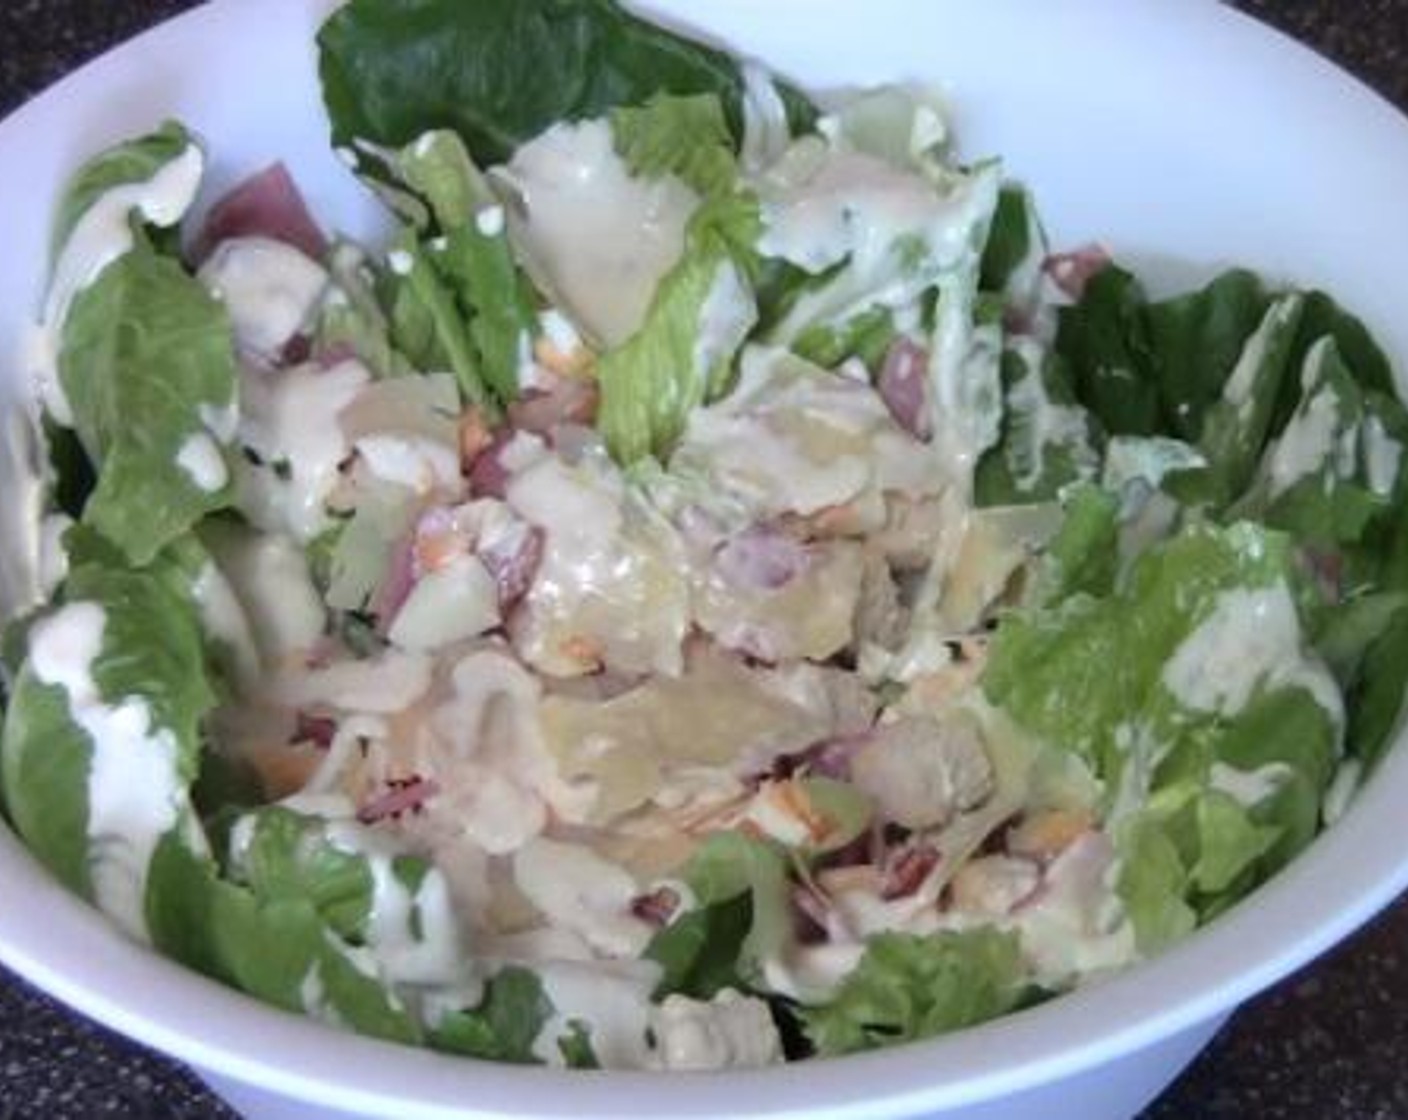 step 5 In a large salad bowl, mix together the Romaine Lettuce (1 head), croutons, bacon, Egg (1), and Shaved Parmesan Cheese (to taste). Serve after drizzling with the dressing.